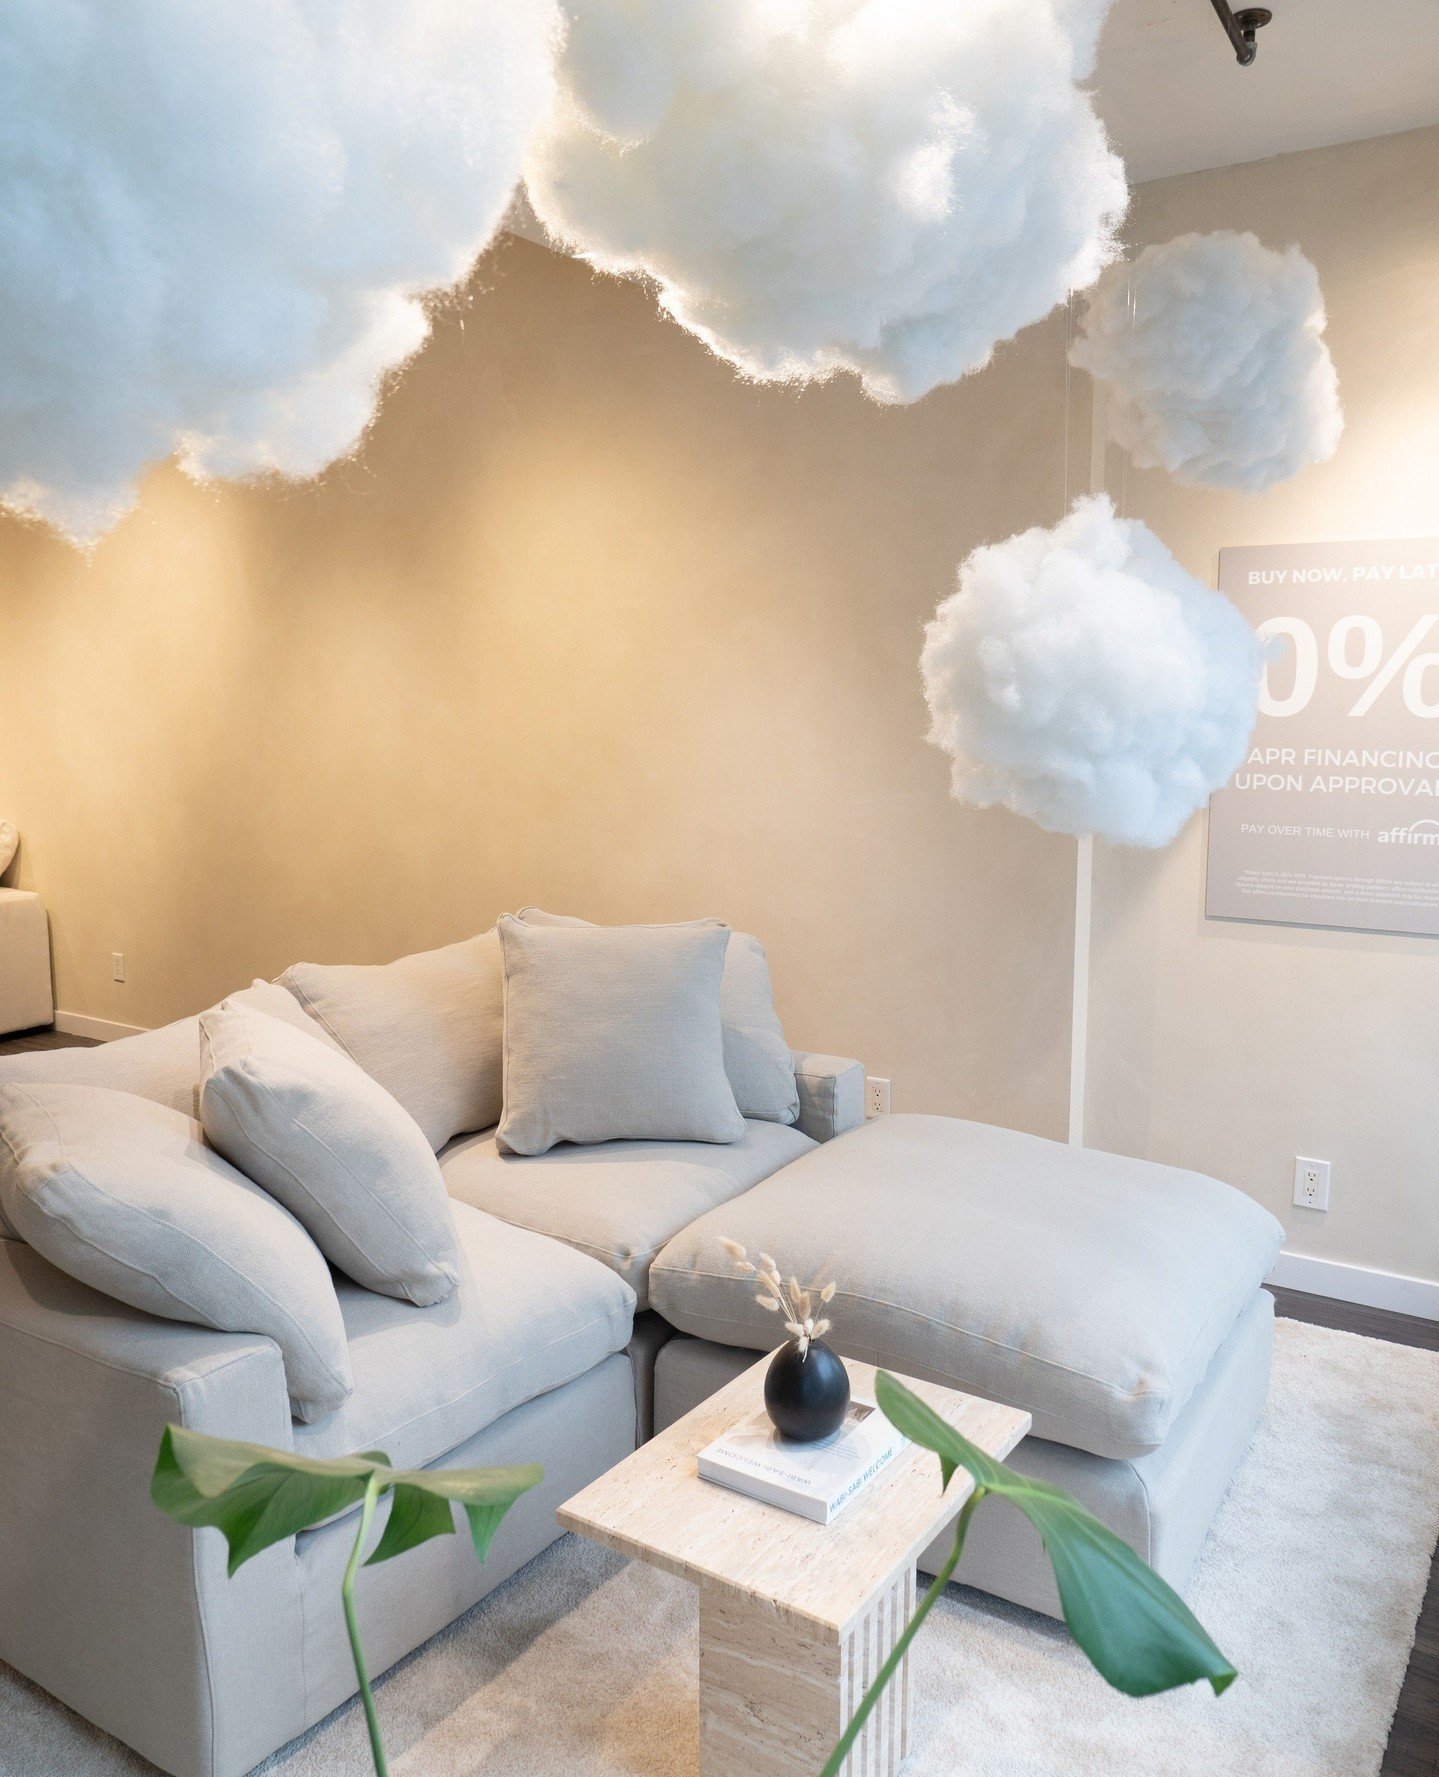 Lounging on clouds. ☁️😍⁠
⁠
Welcome to South Granville @couch_haus! 🛋️⁠
⁠
Couch Haus just opened their flagship store on South Granville and their philosophy is that your sofa isn't just a piece of furniture&mdash;it's a bespoke masterpiece crafted 